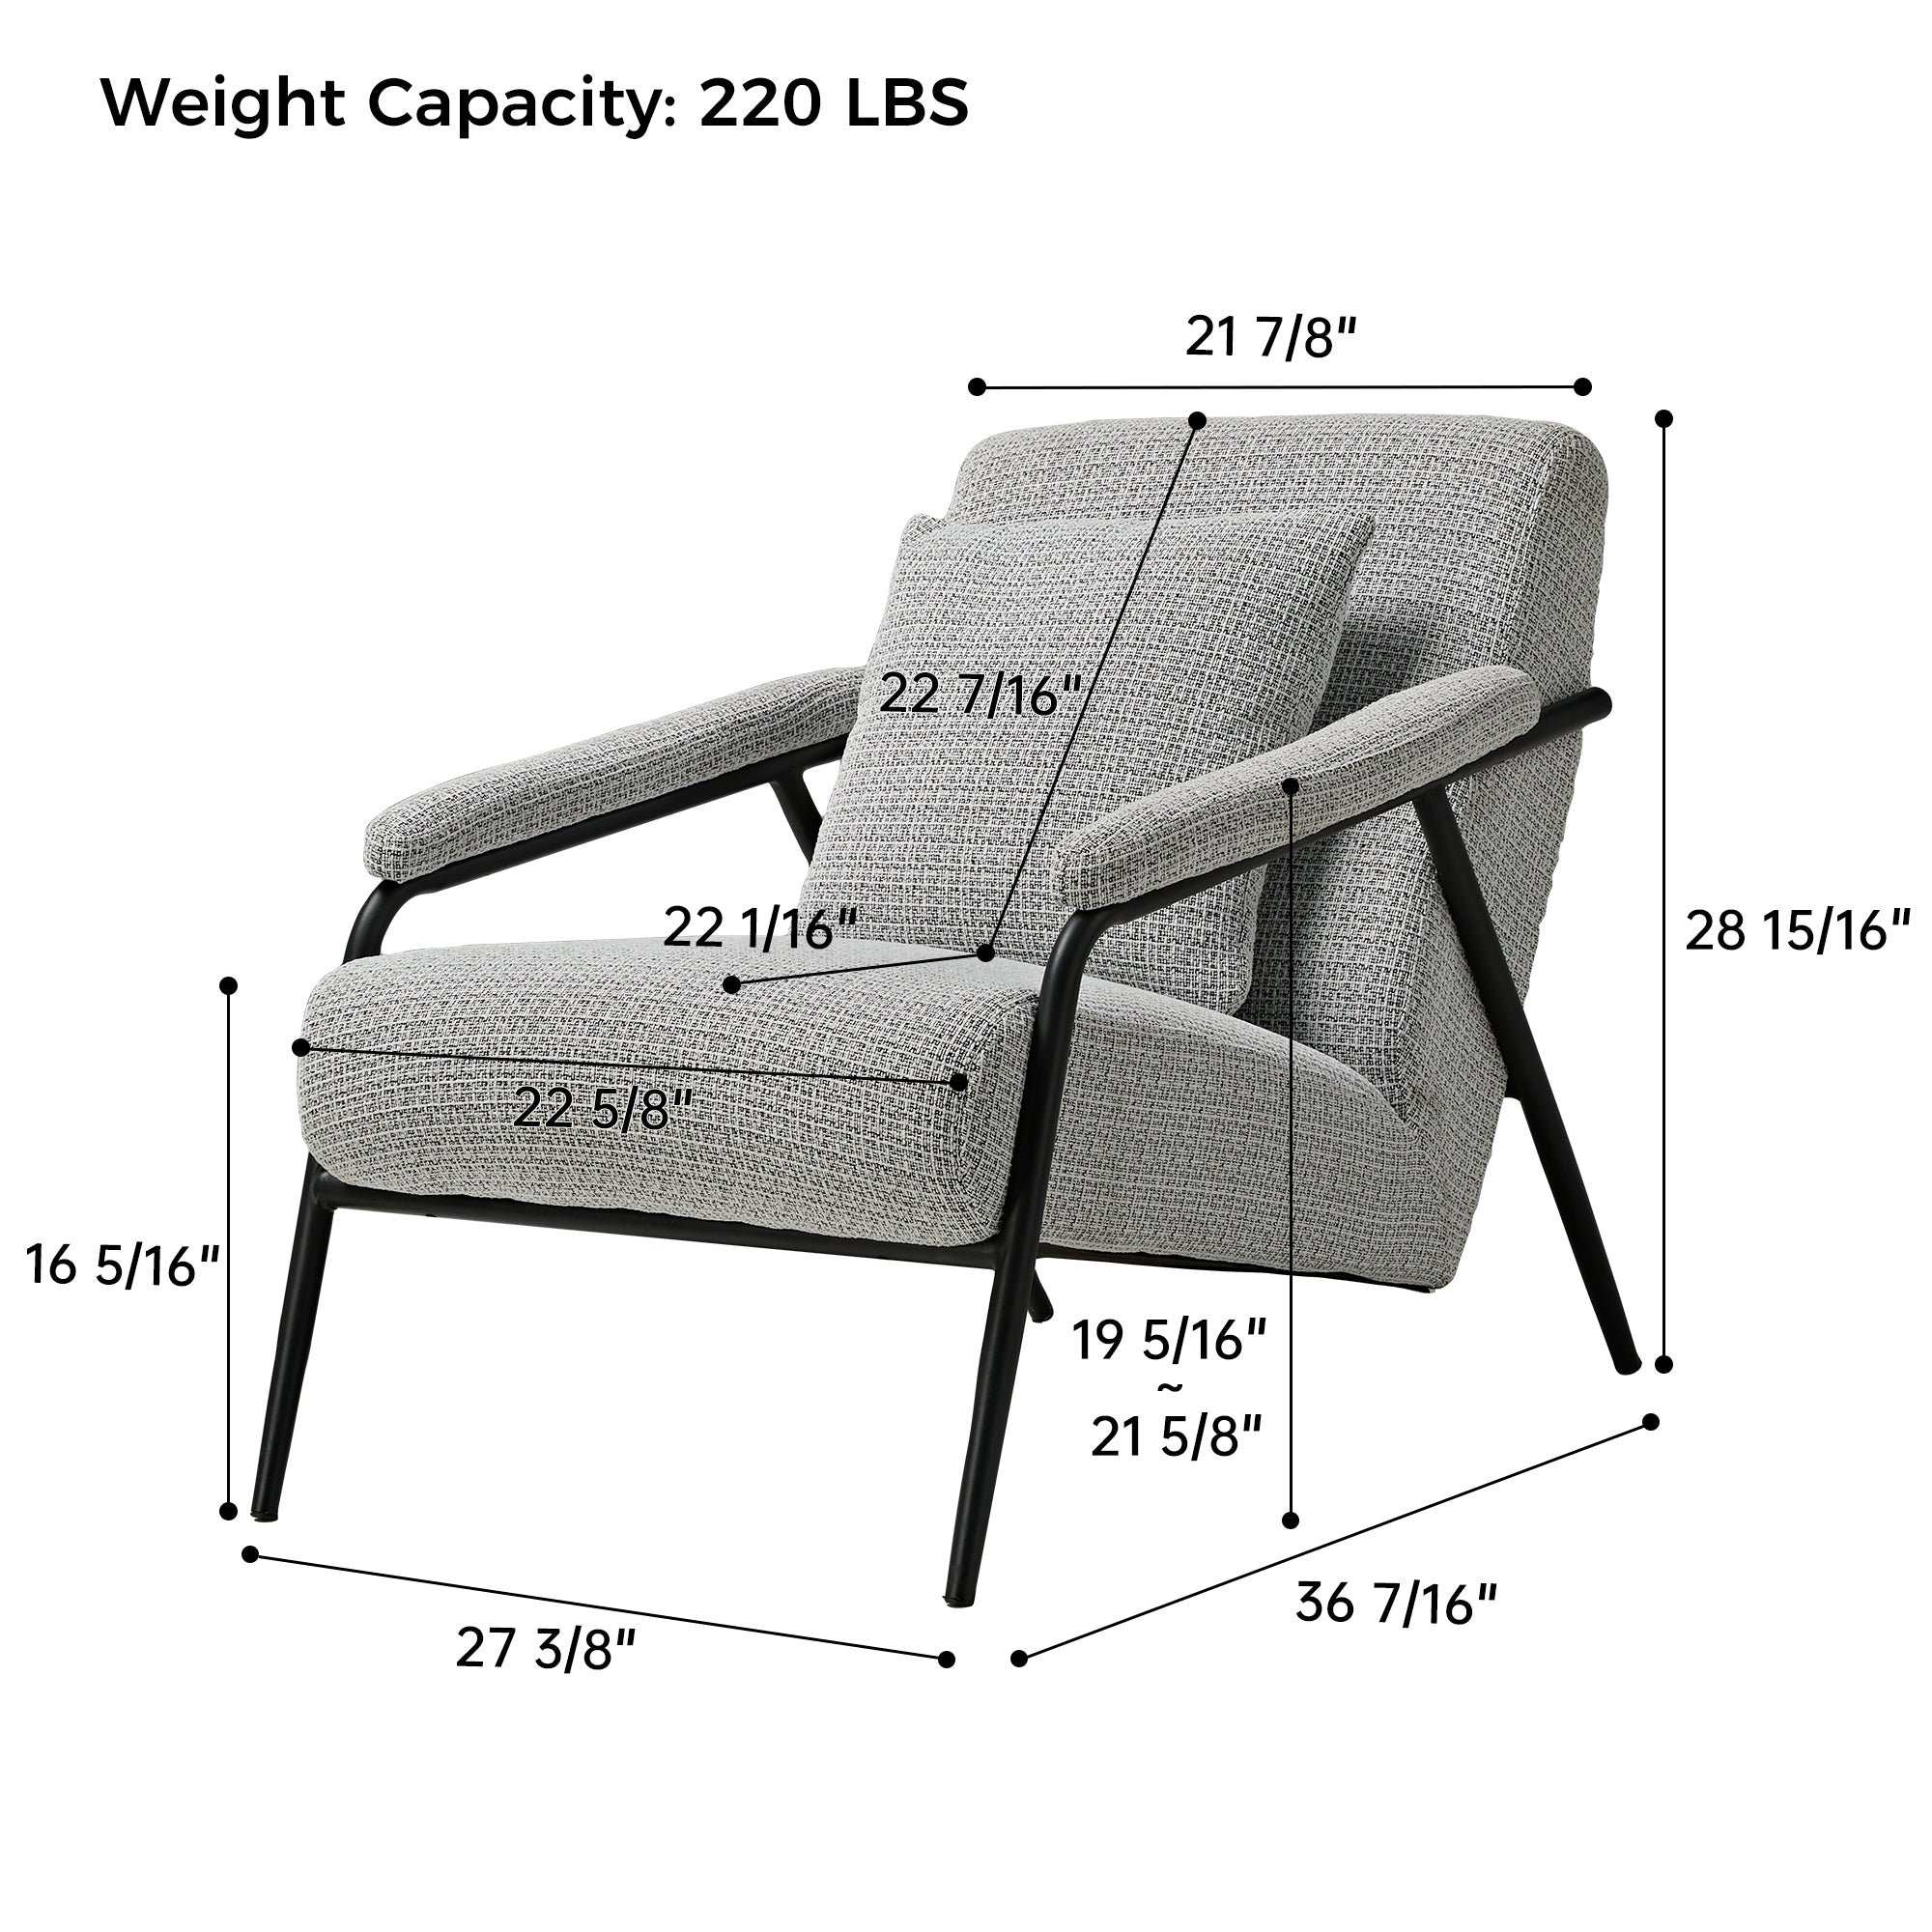 Italian Minimalist Gray Lounge Chair with Innovative Wrought Iron Frame